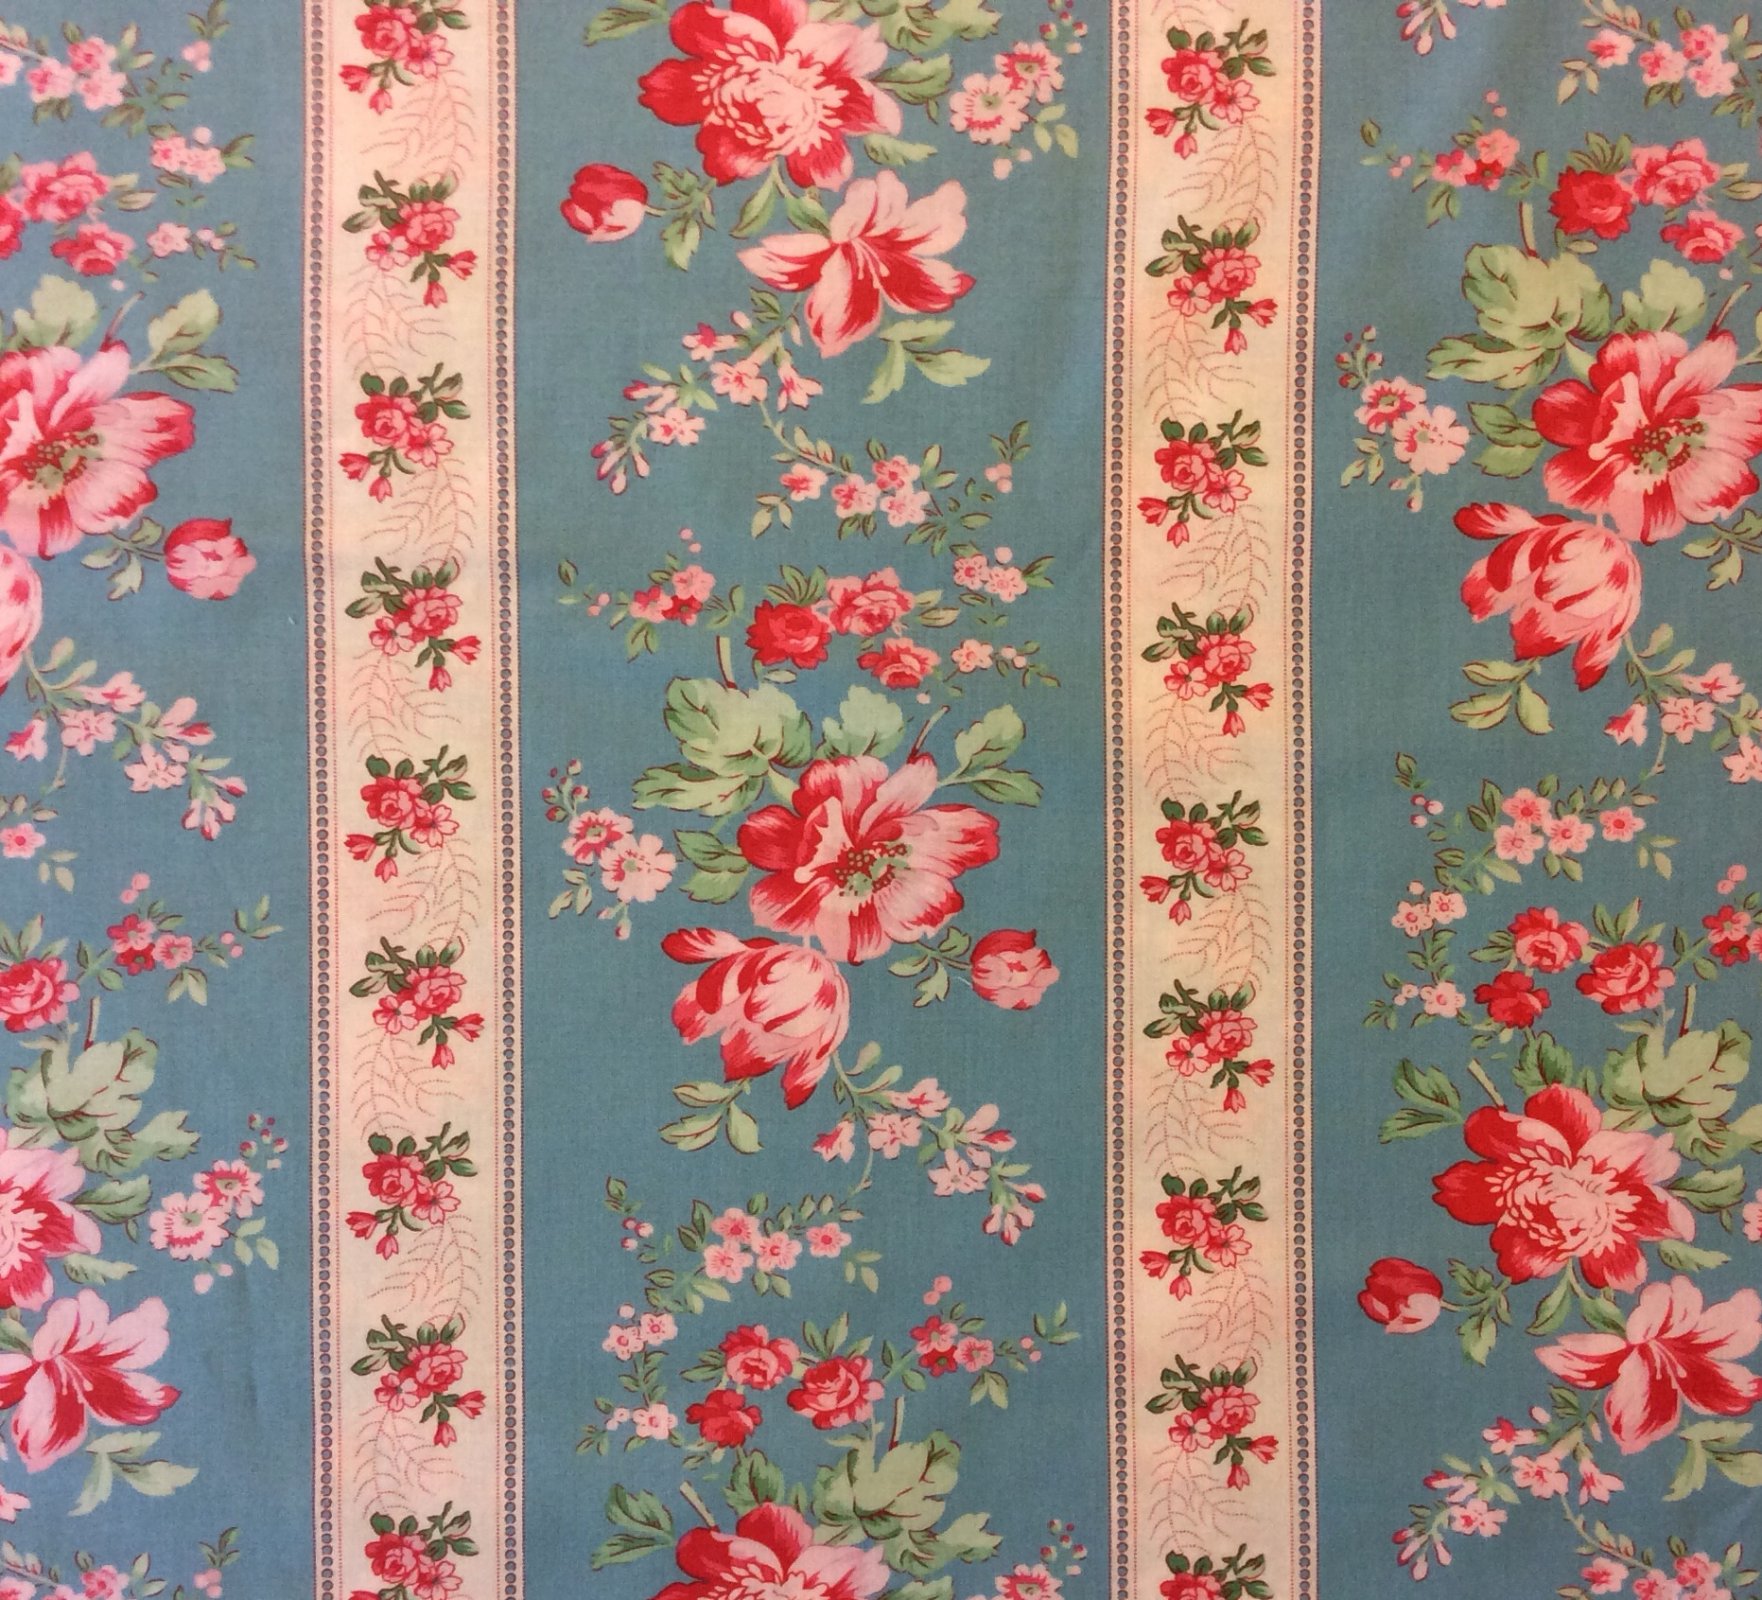 Country Life French Floral Wallpaper Kitschy Cotton Quilting Fabric